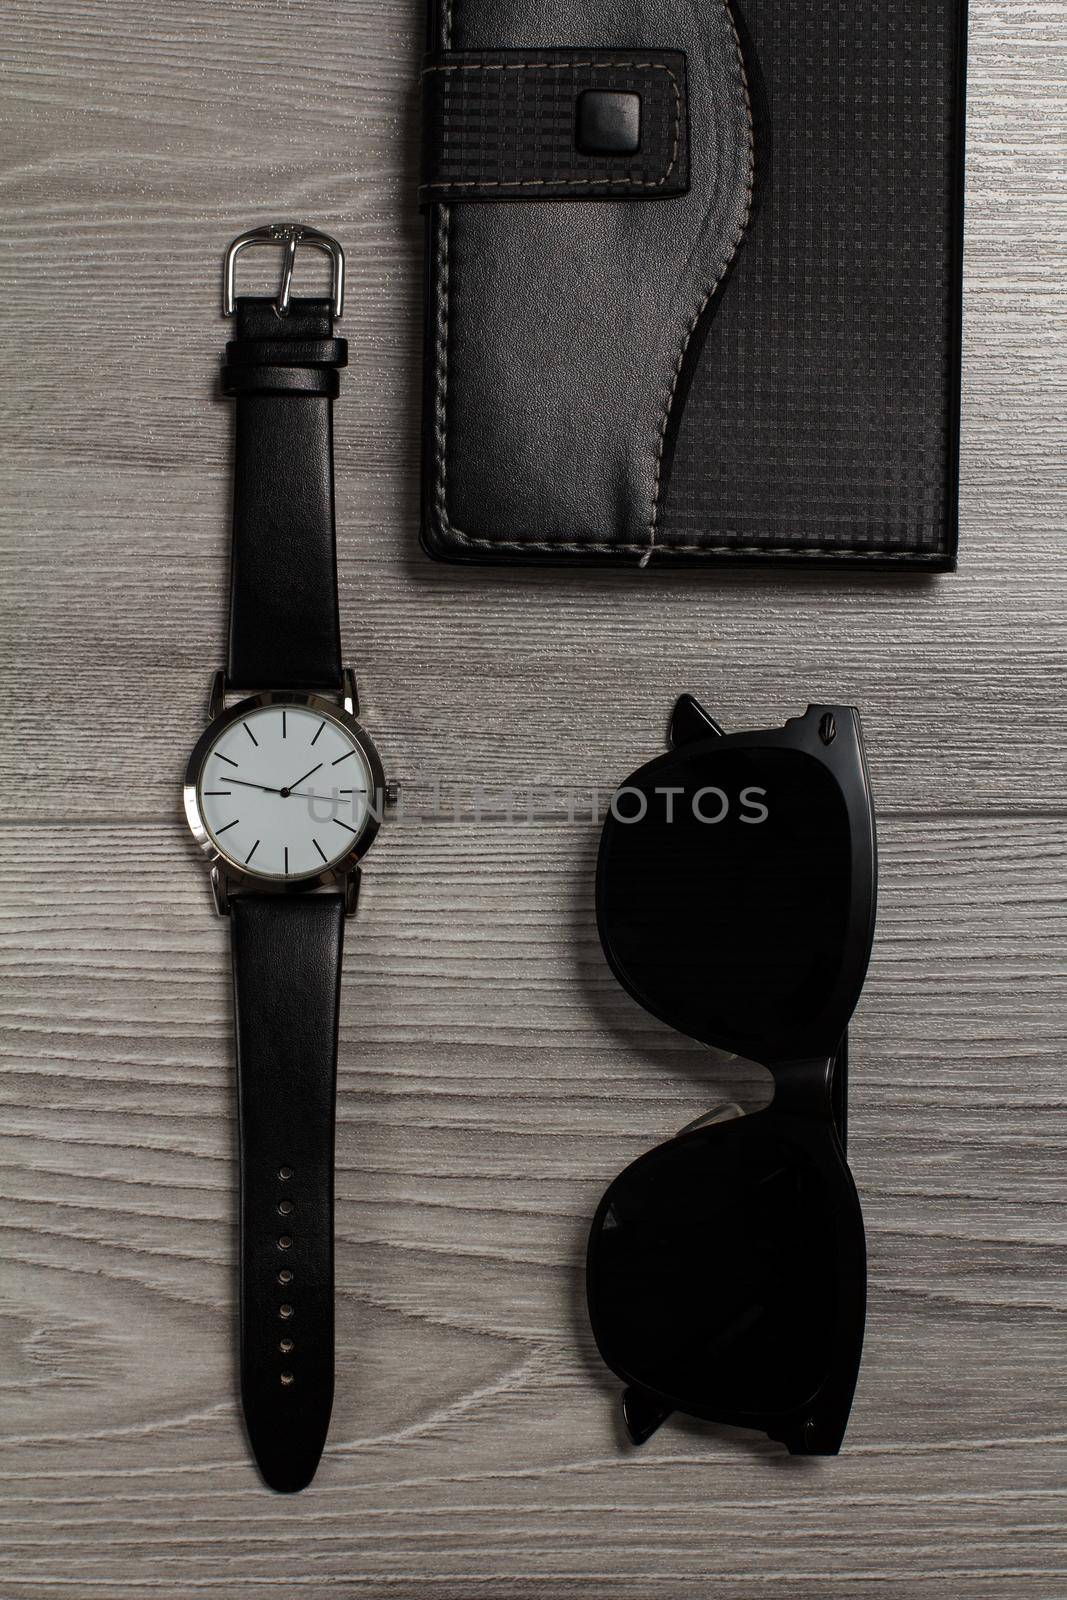 Watch with a leather strap, notebook in leather cover, black sunglasses on a gray wooden background